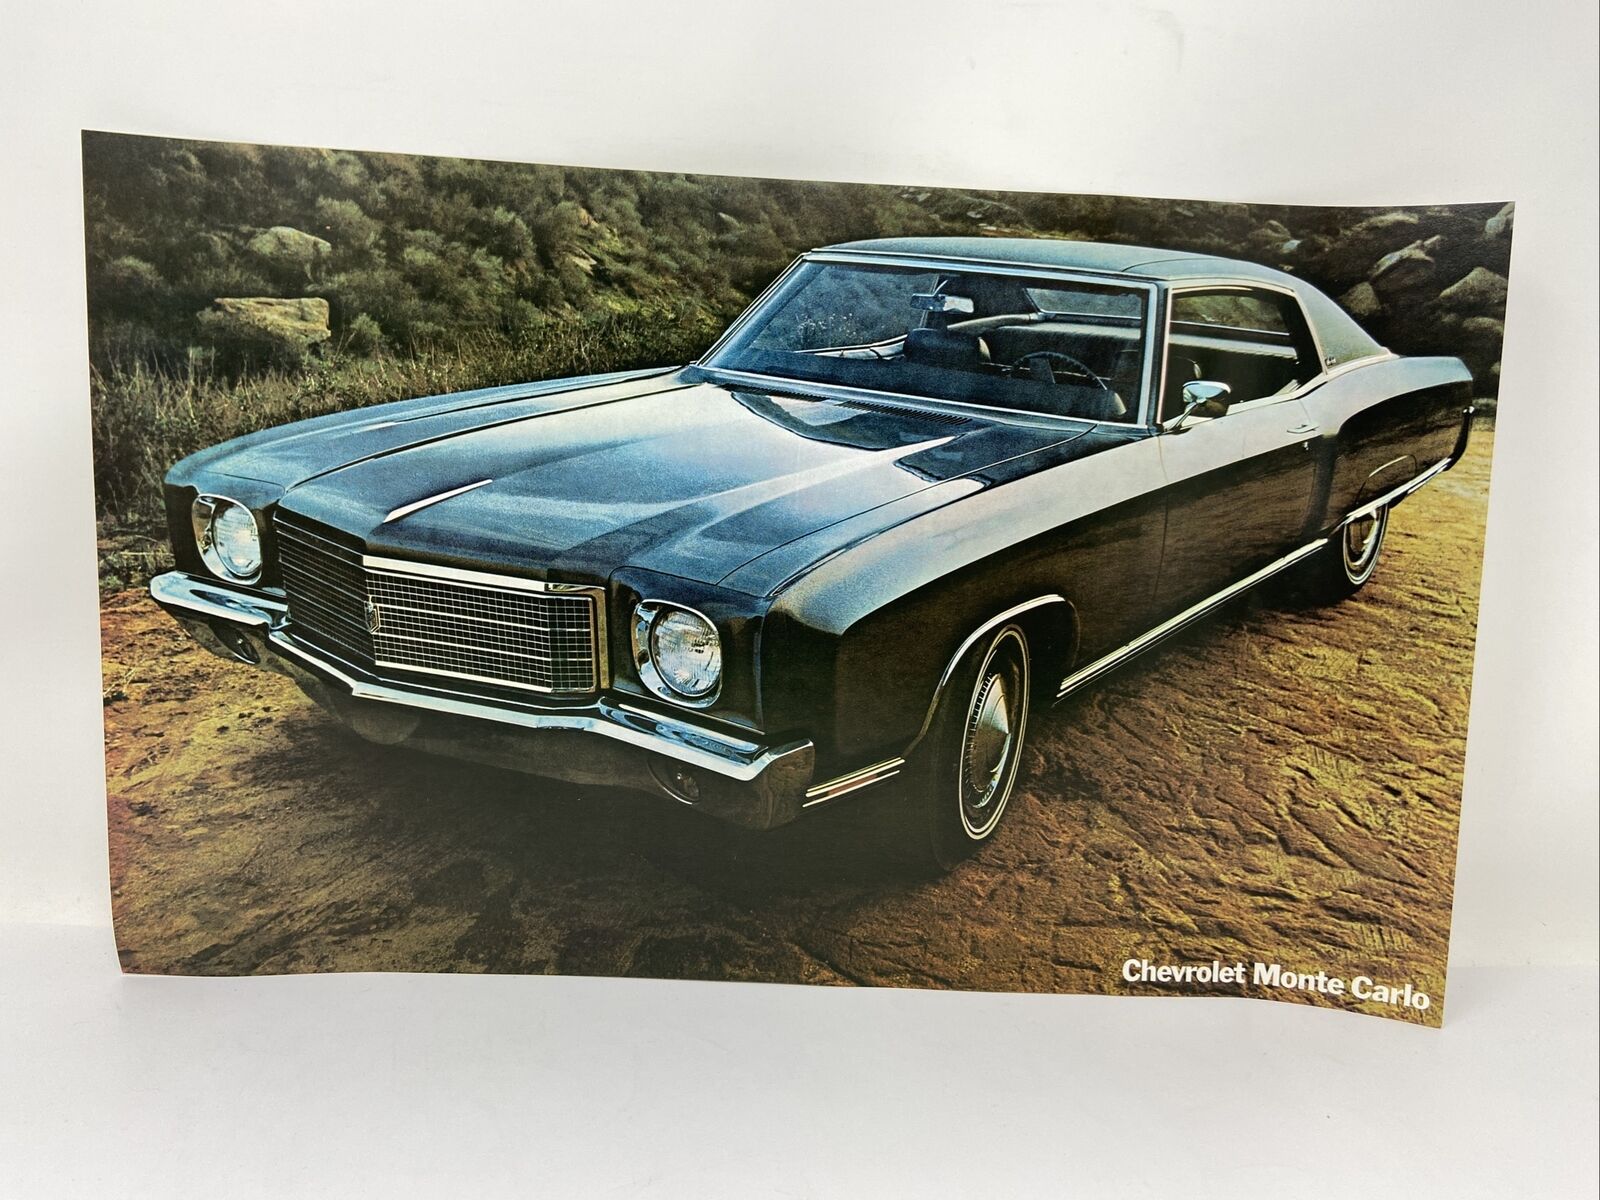 1969 1970 Chevrolet Monte Carlo Dealership Chevy Showroom Poster  Specs on Back